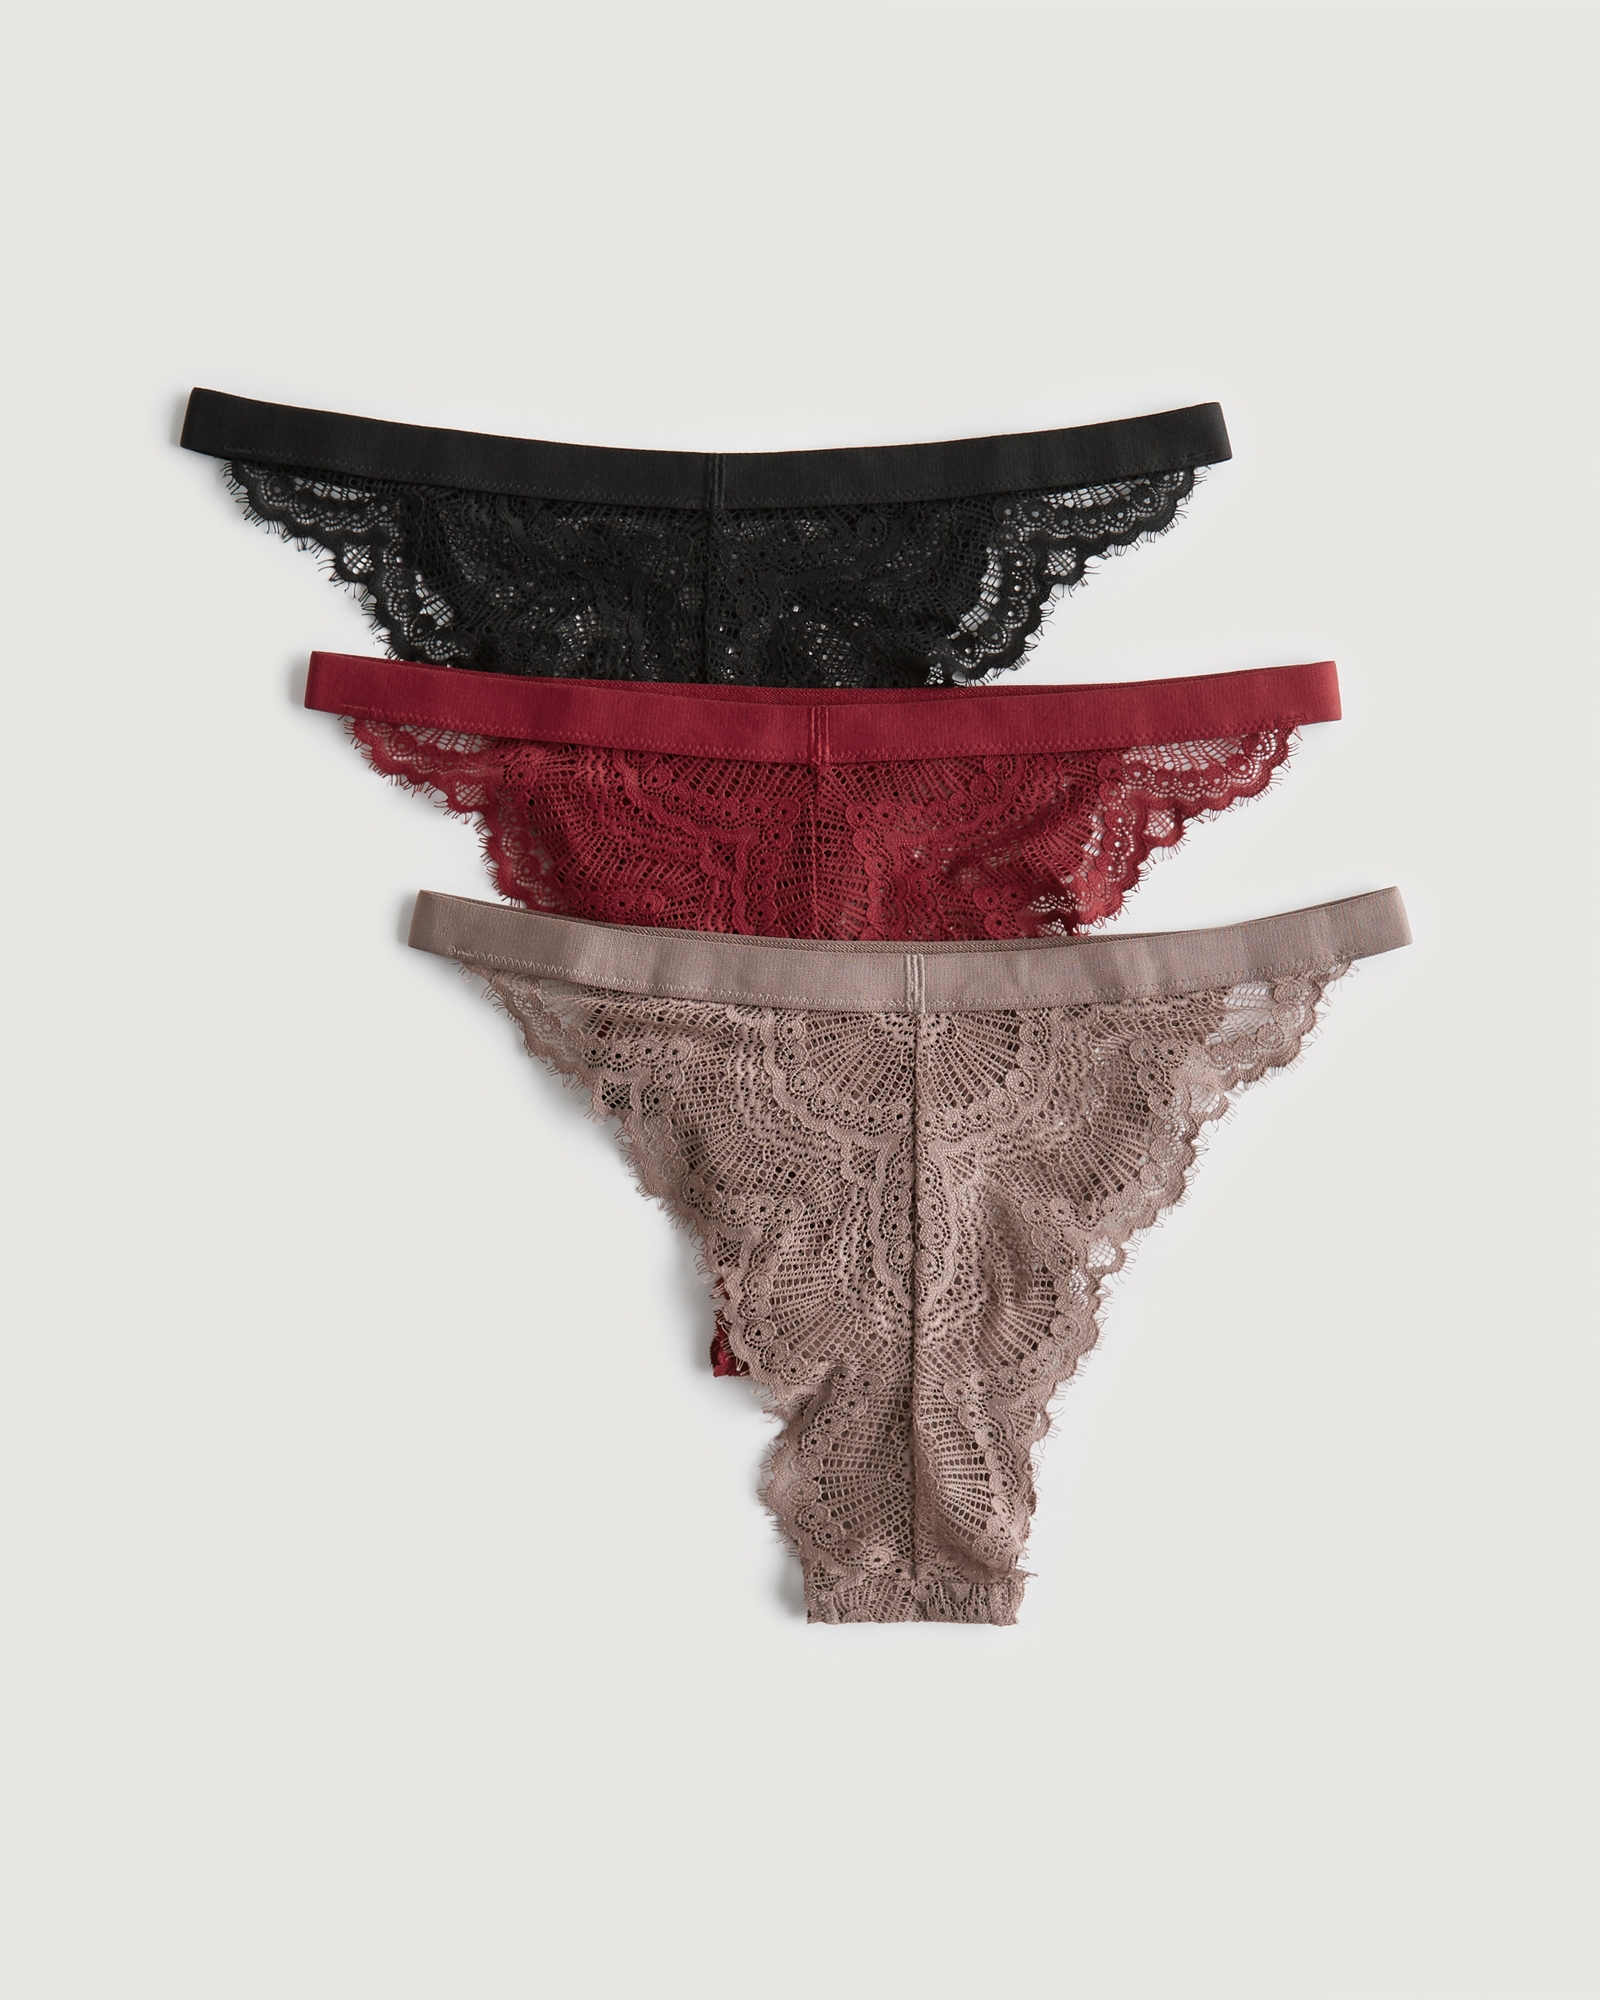 Women's Gilly Hicks Lace String Cheeky 3-Pack